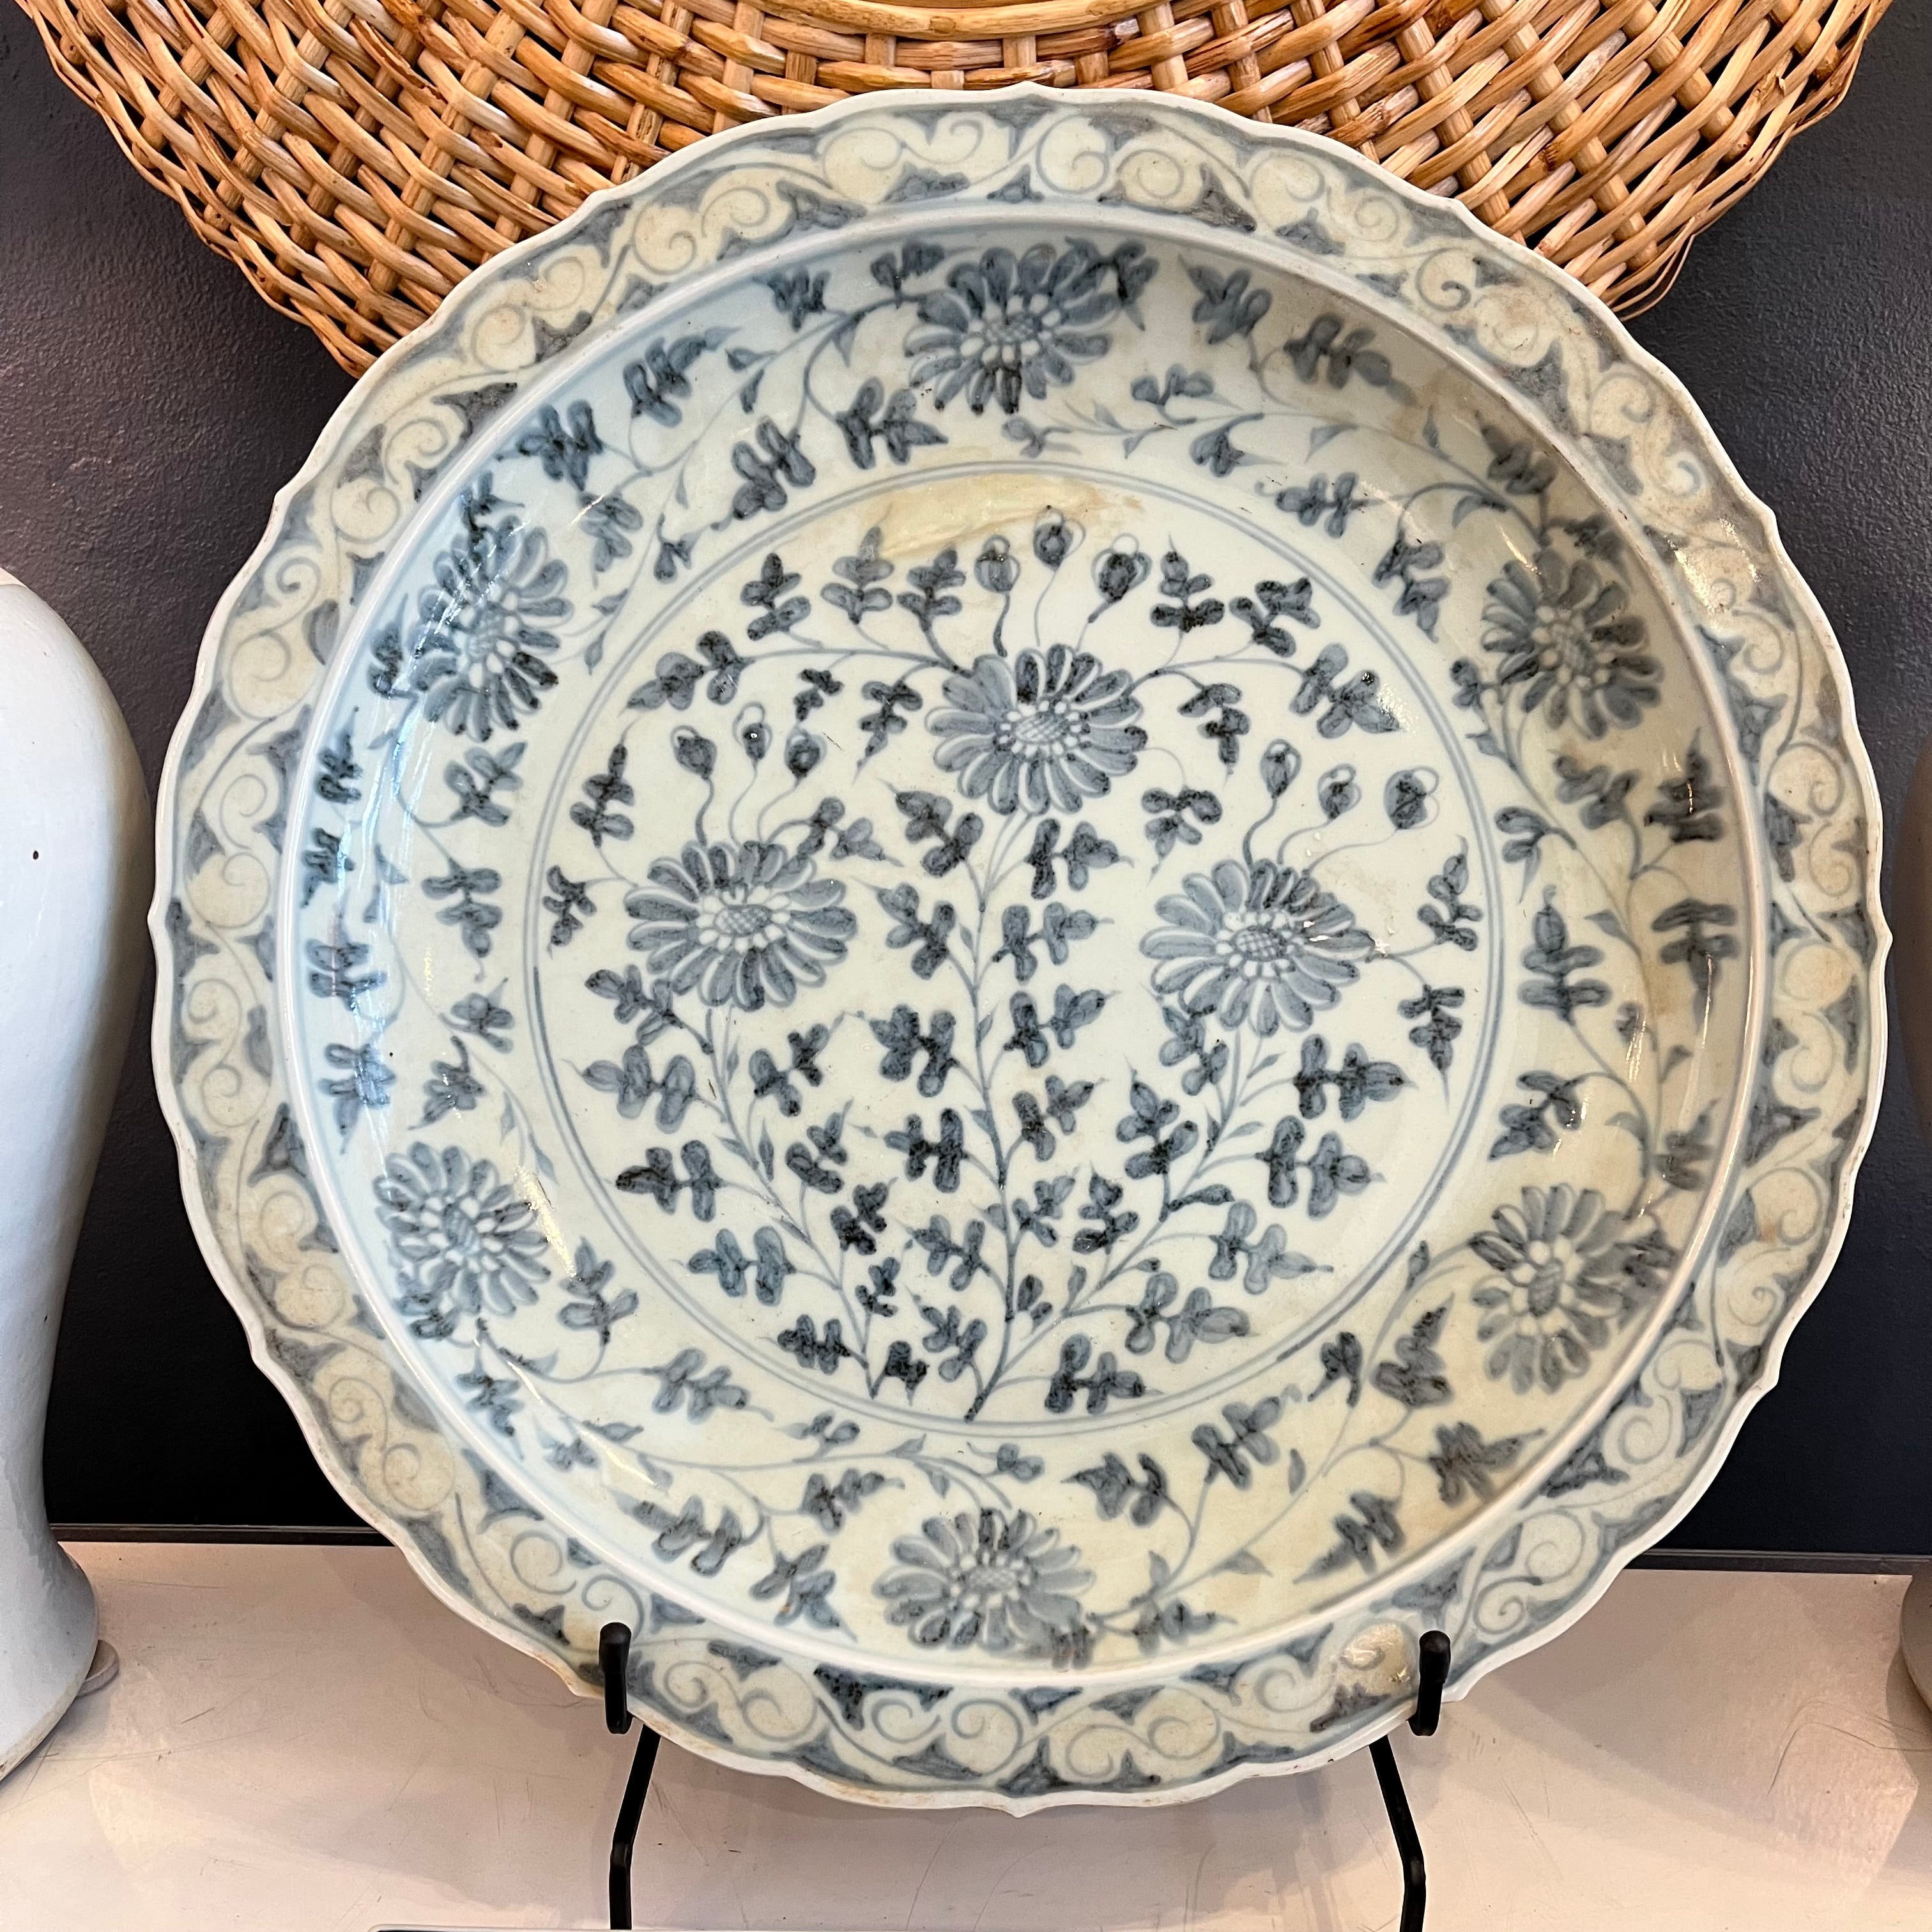 Large Blue and White Floral Plate